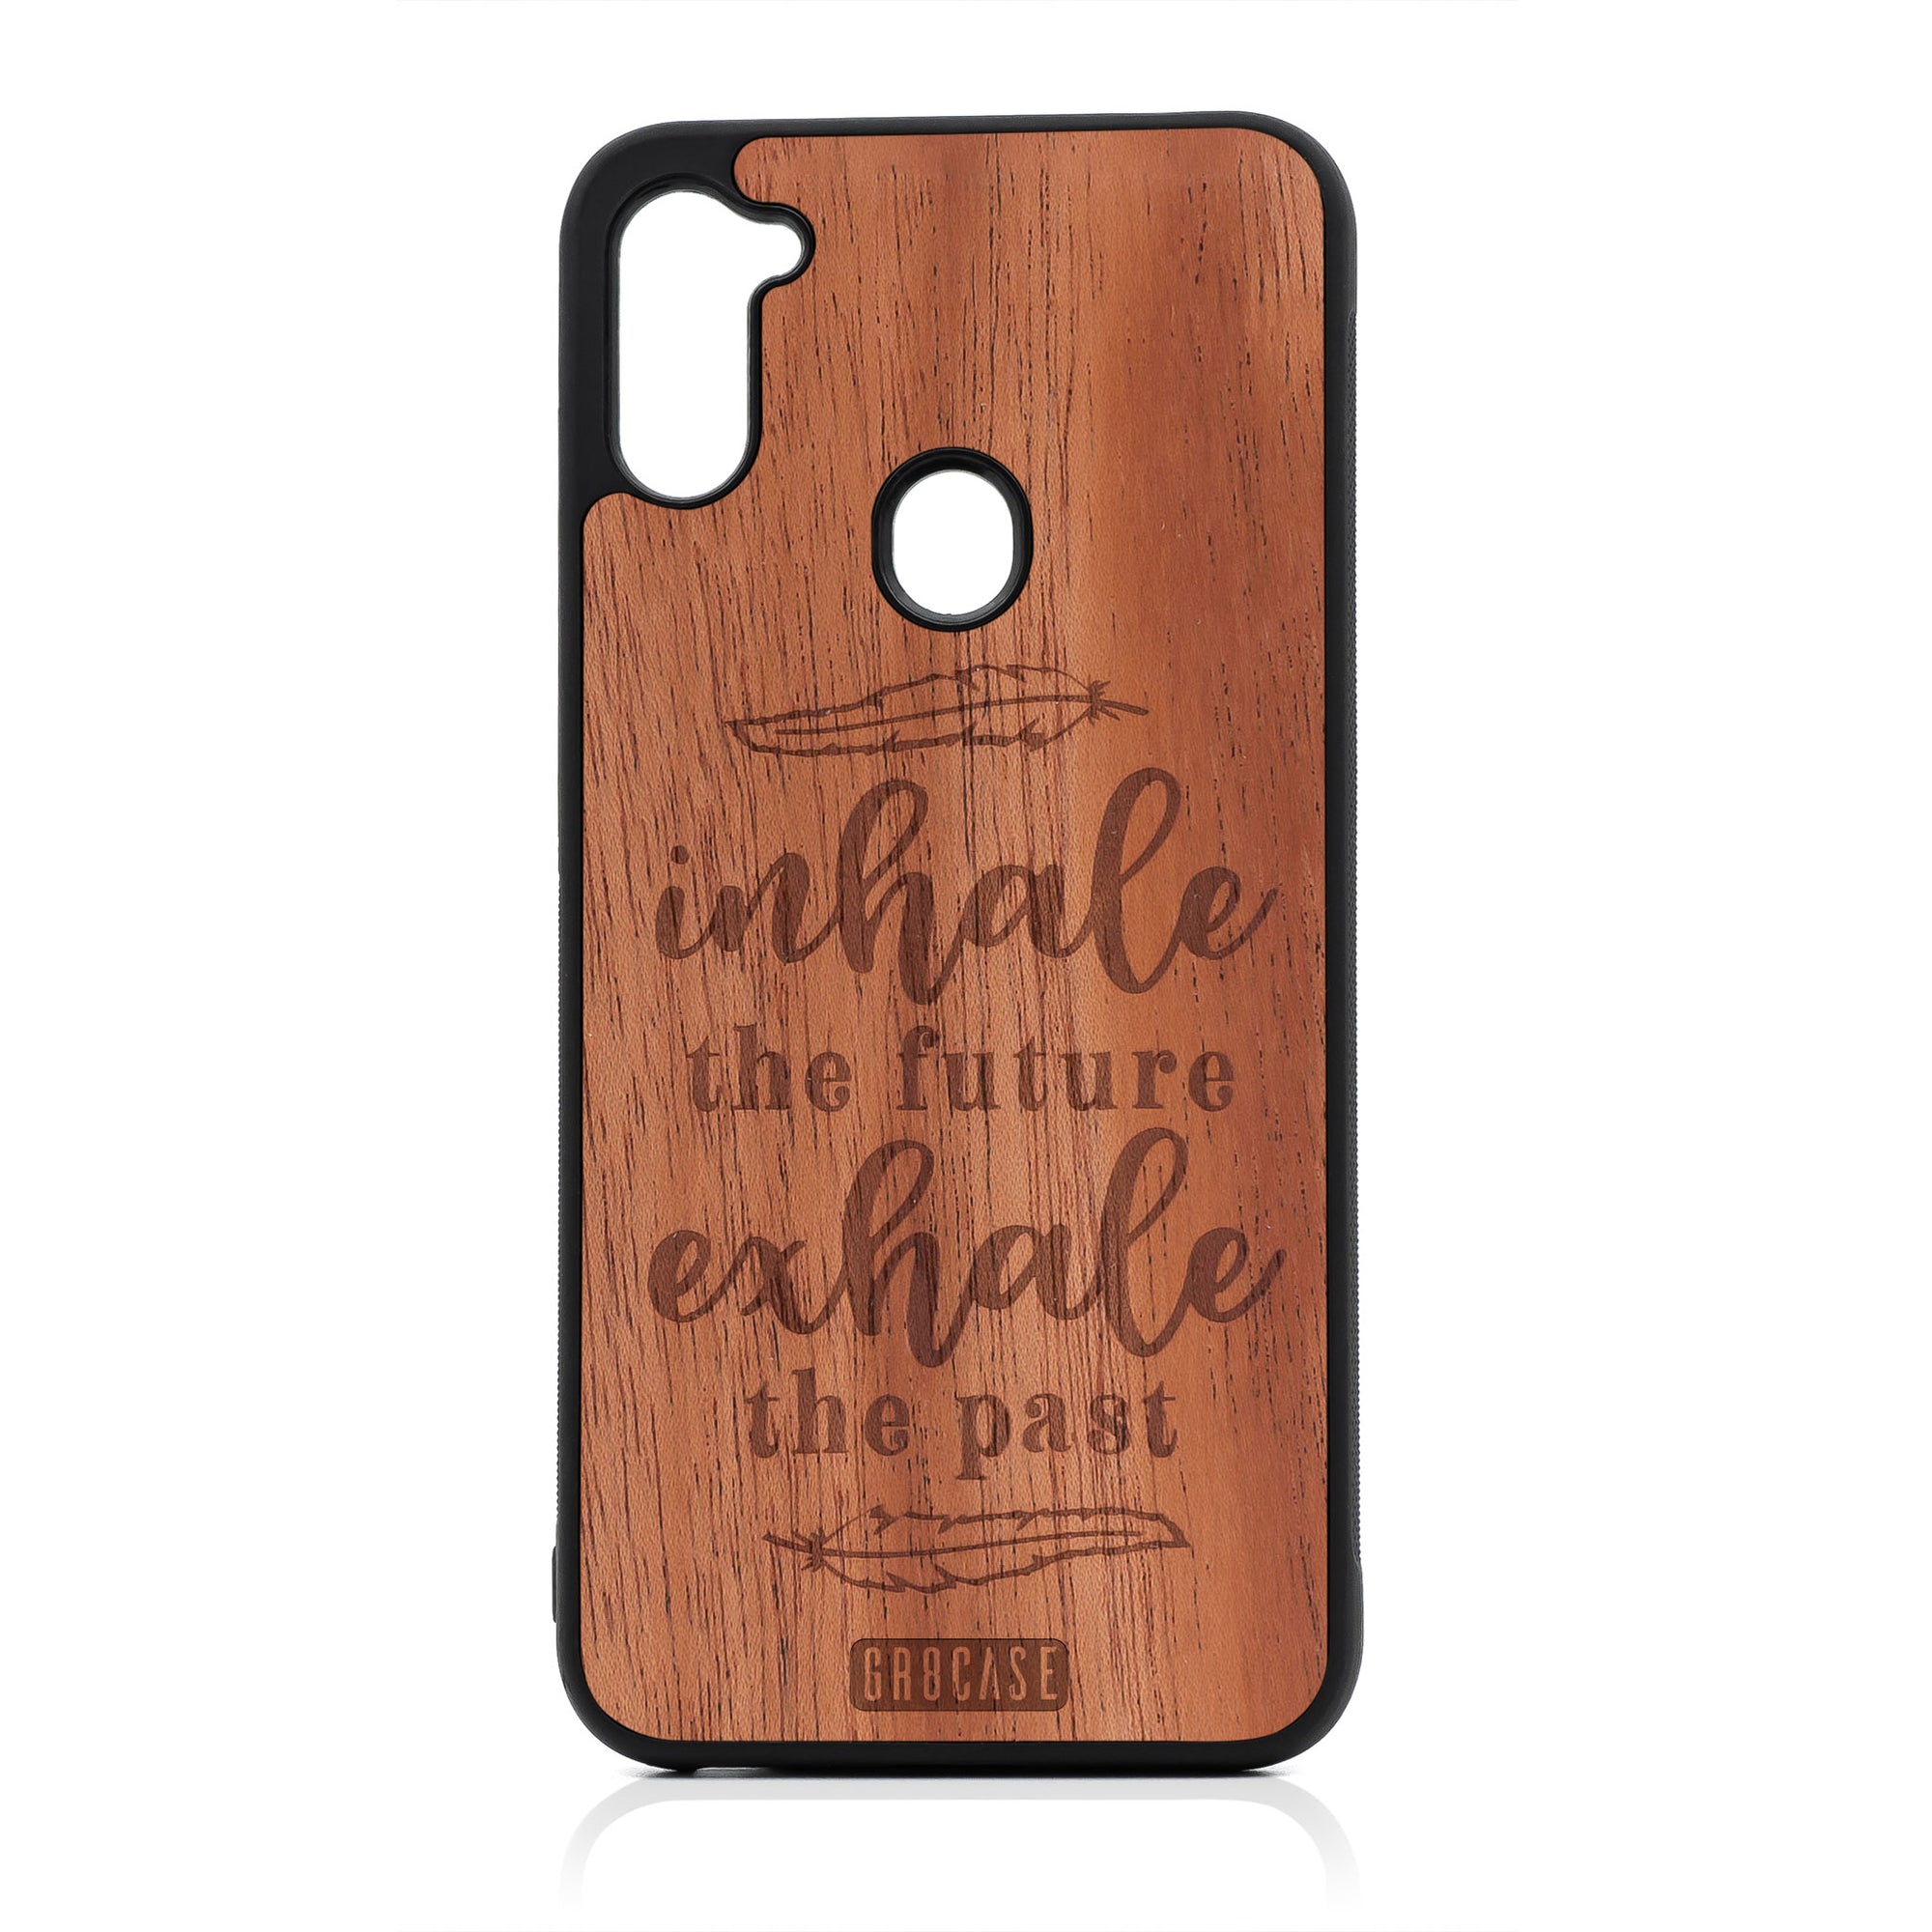 Inhale The Future Exhale The Past Design Wood Case For Samsung Galaxy A11